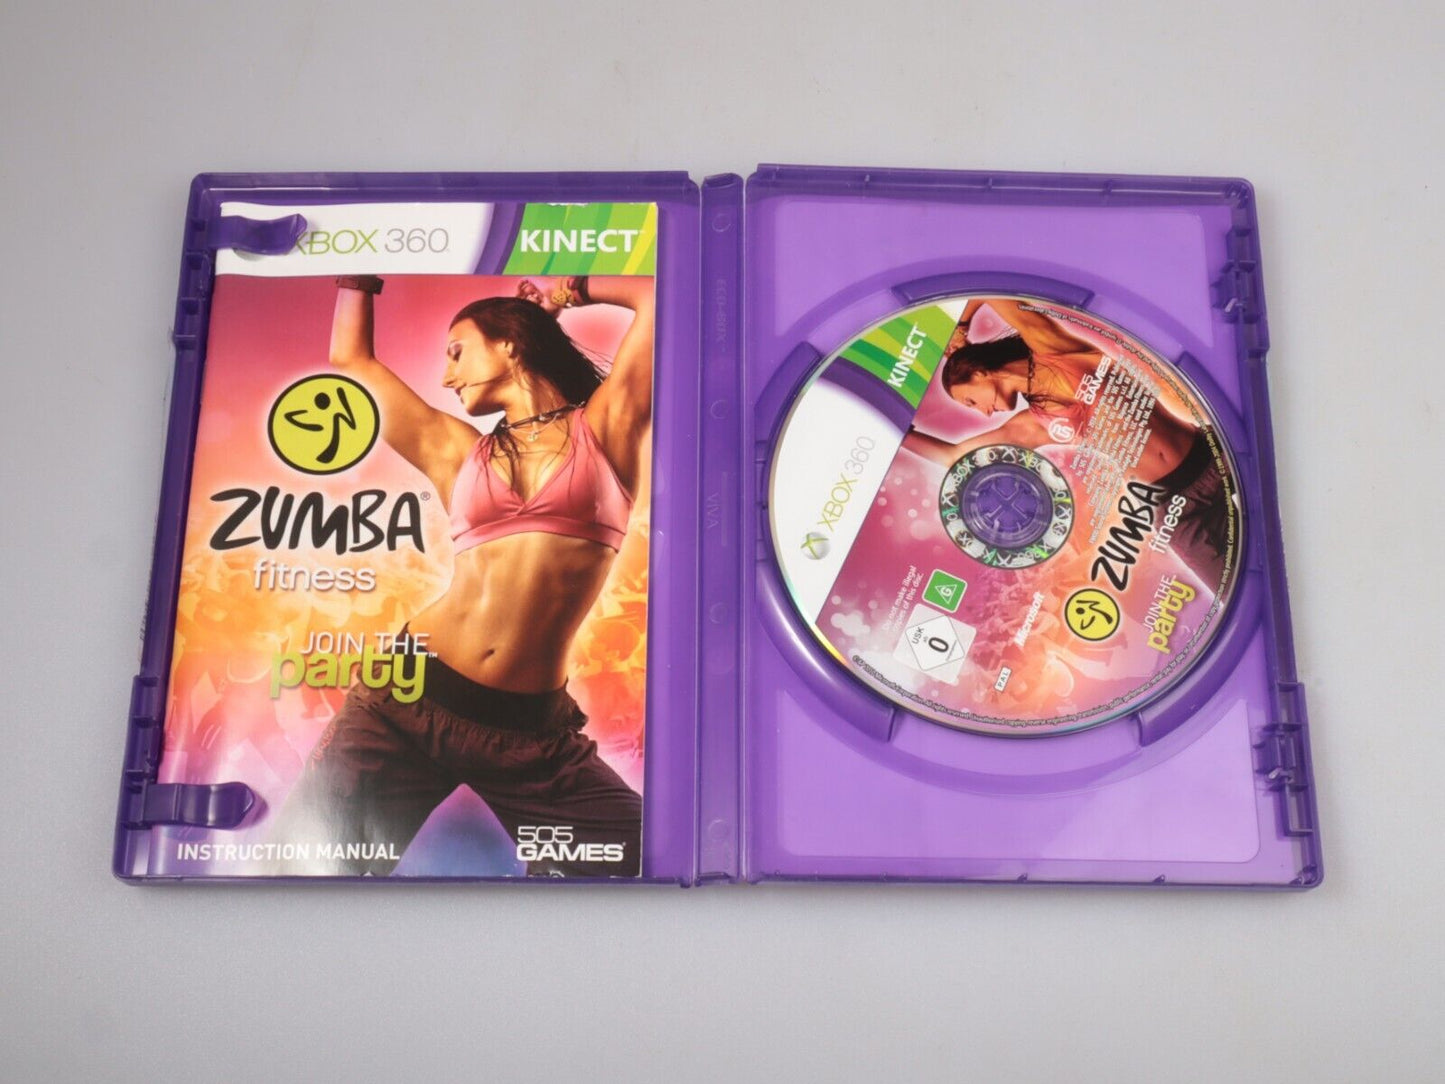 Xbox 360 | Zumba Fitness - Join the party